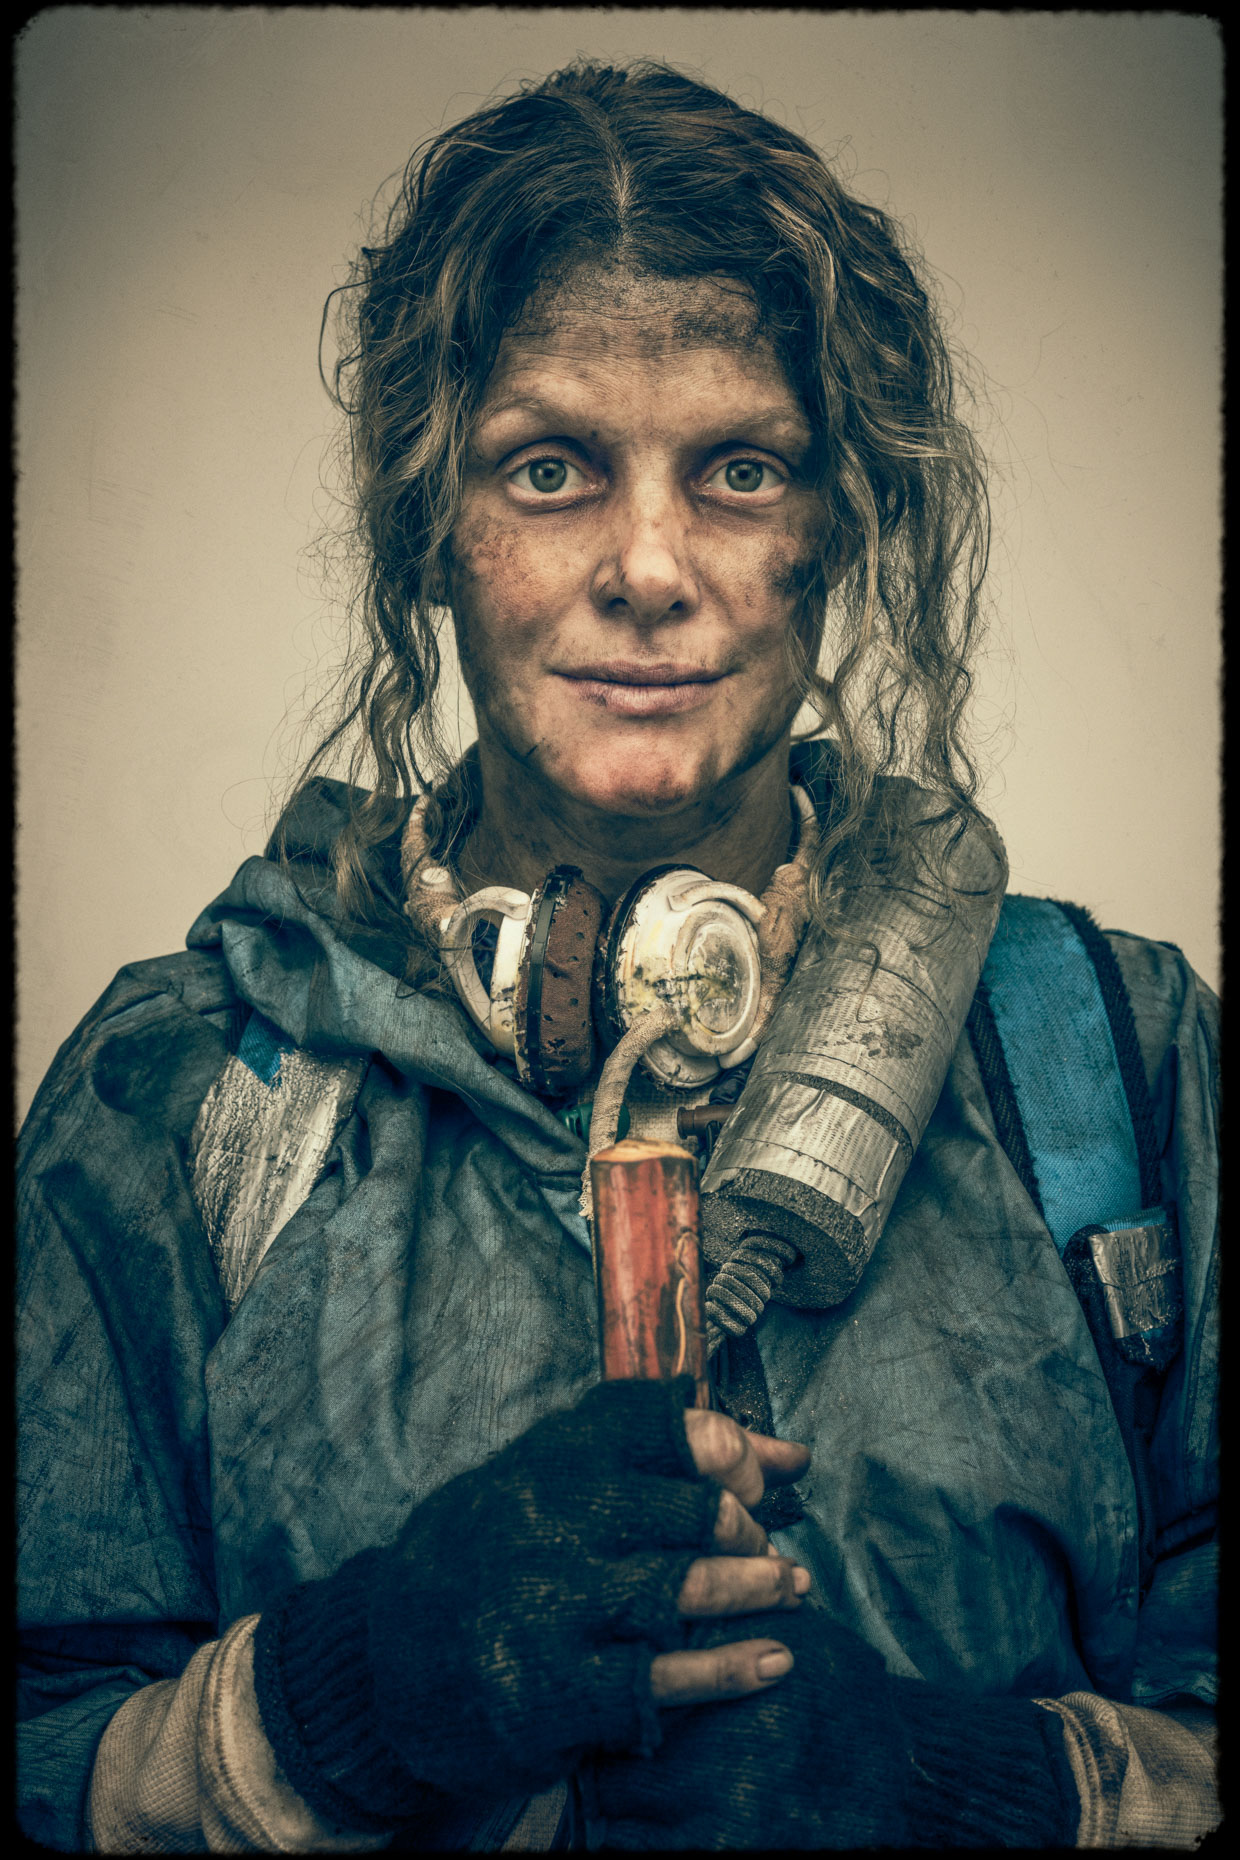 Character Portrait of actor Mandy Philipps as Kelly Mikos, one of 9 main characters. Introducing the apocalyptic world of the Bad Choices Project, a cinematic visual screenplay and personal project by Andy Batt.